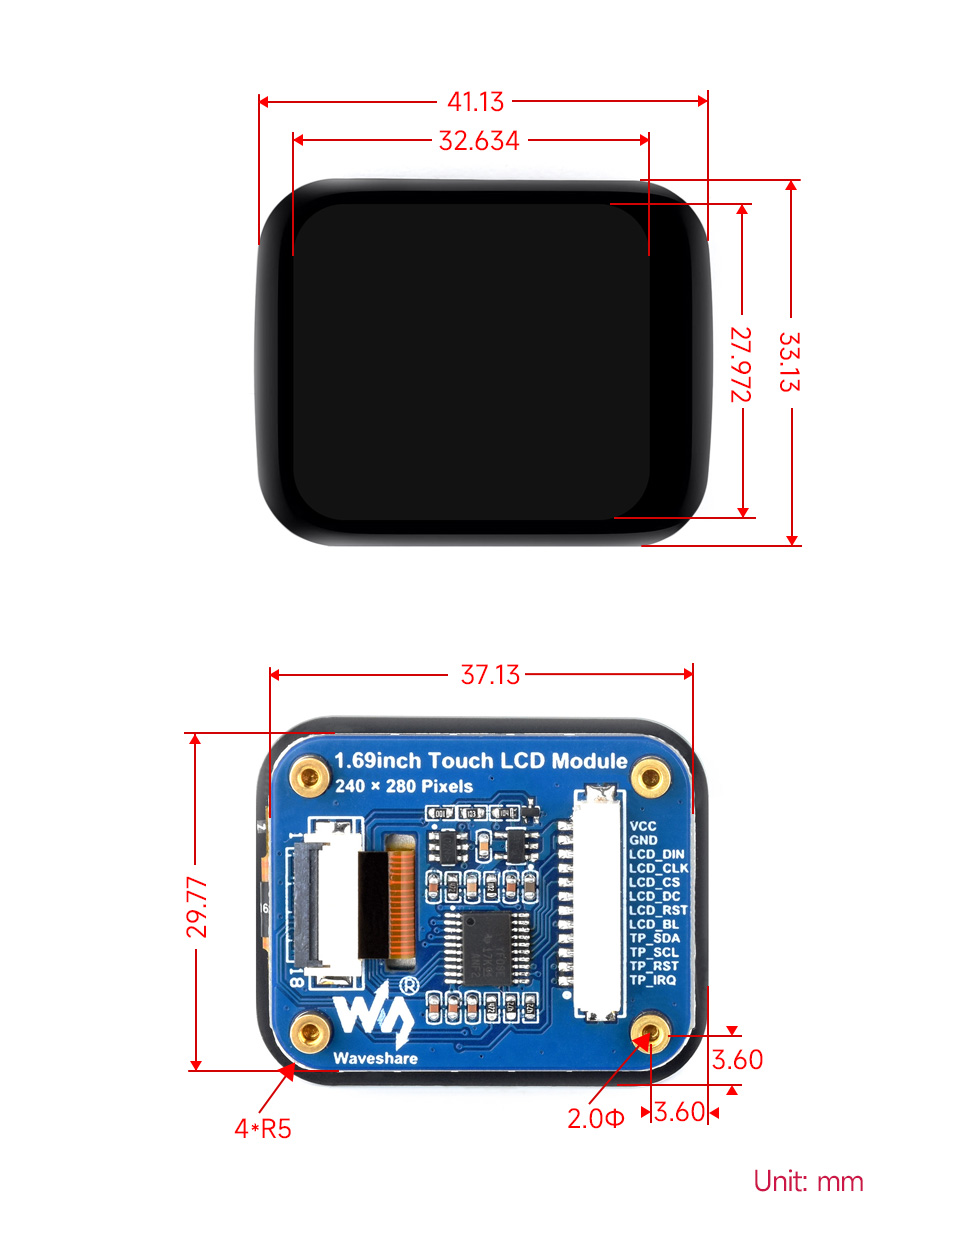 1.69inch Touch LCD display, outline dimensions